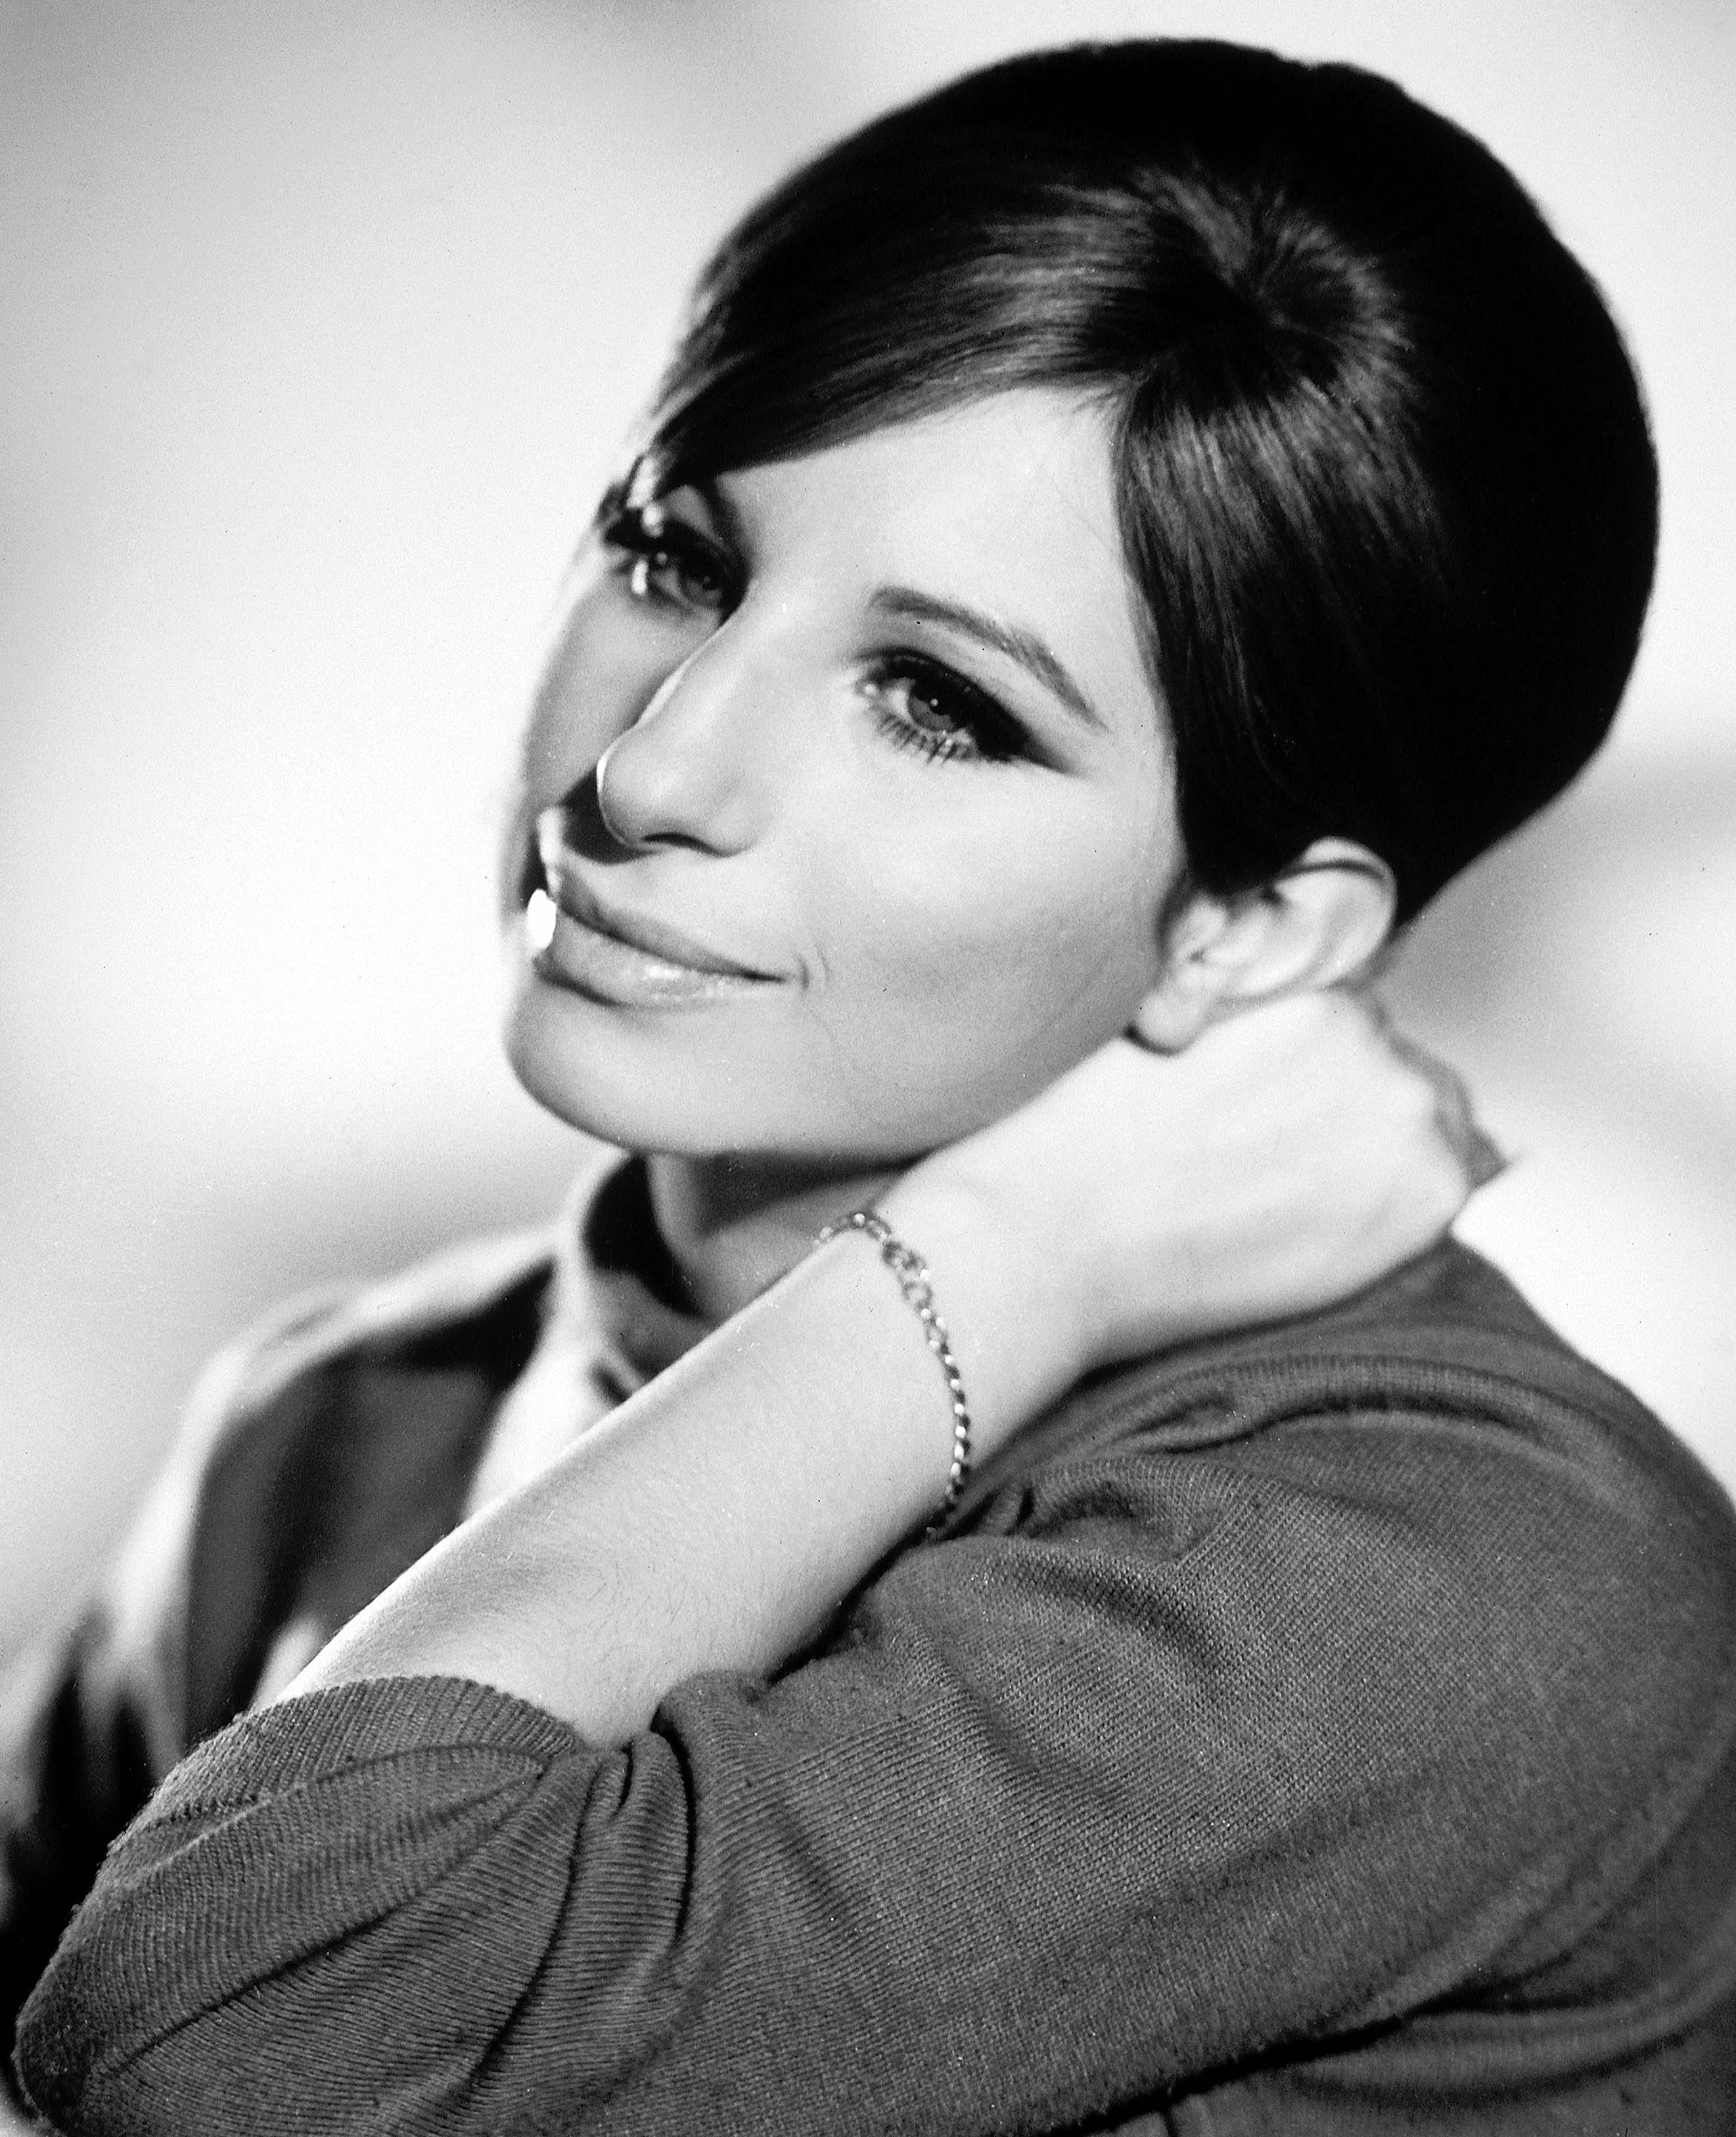 Barbra Streisand at 18, circa 1960. | Source: Getty Images